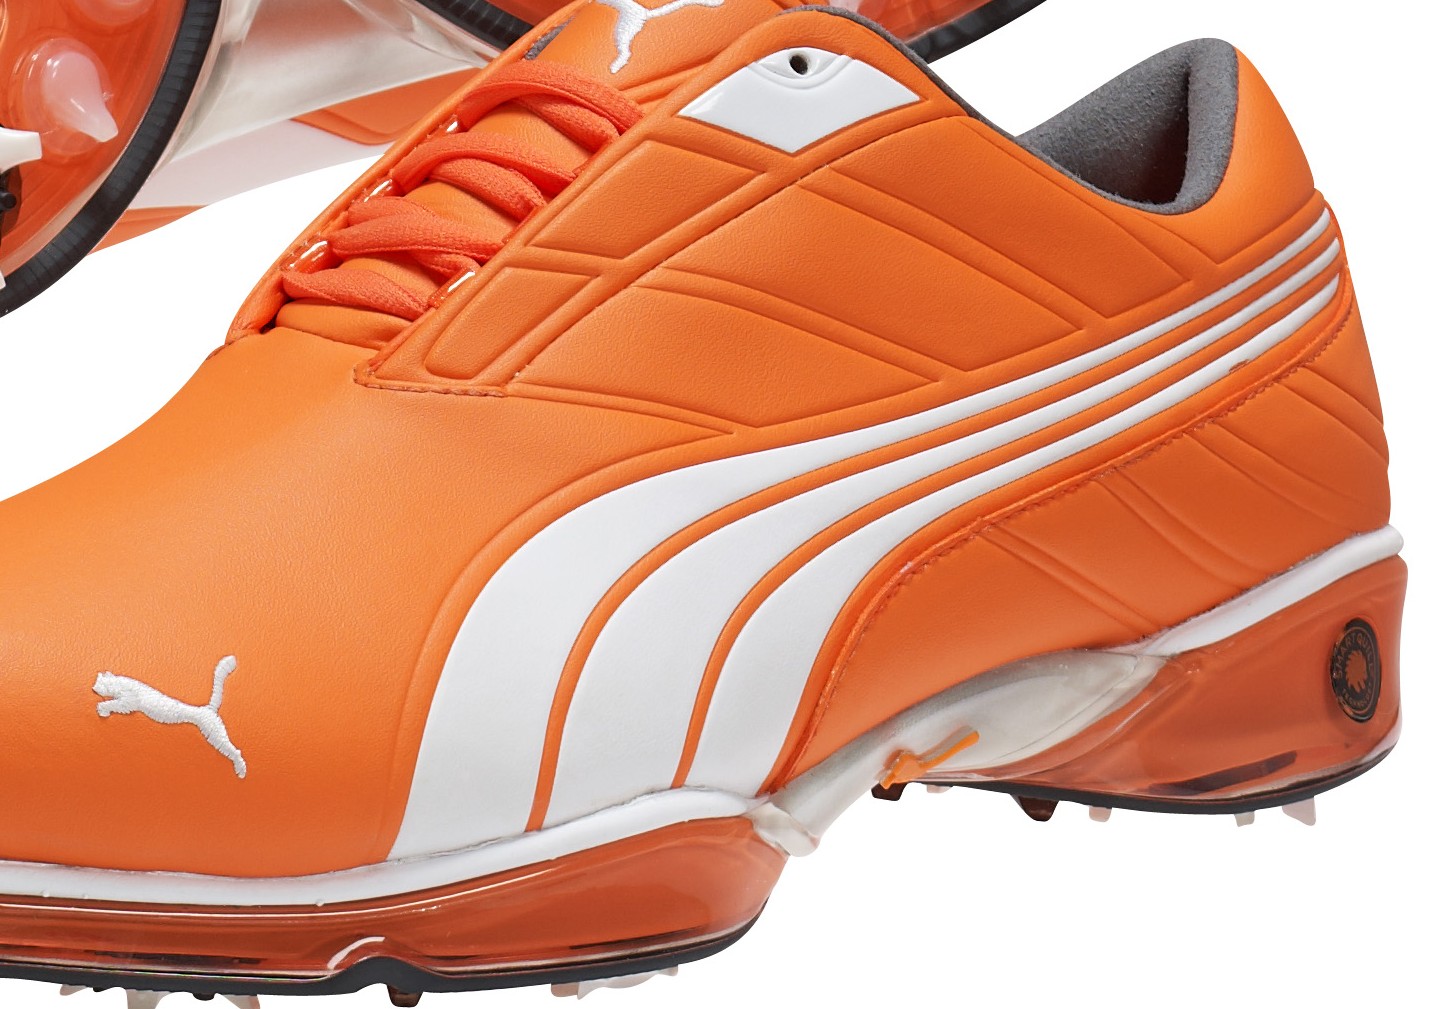 puma cell fusion 2 golf shoes